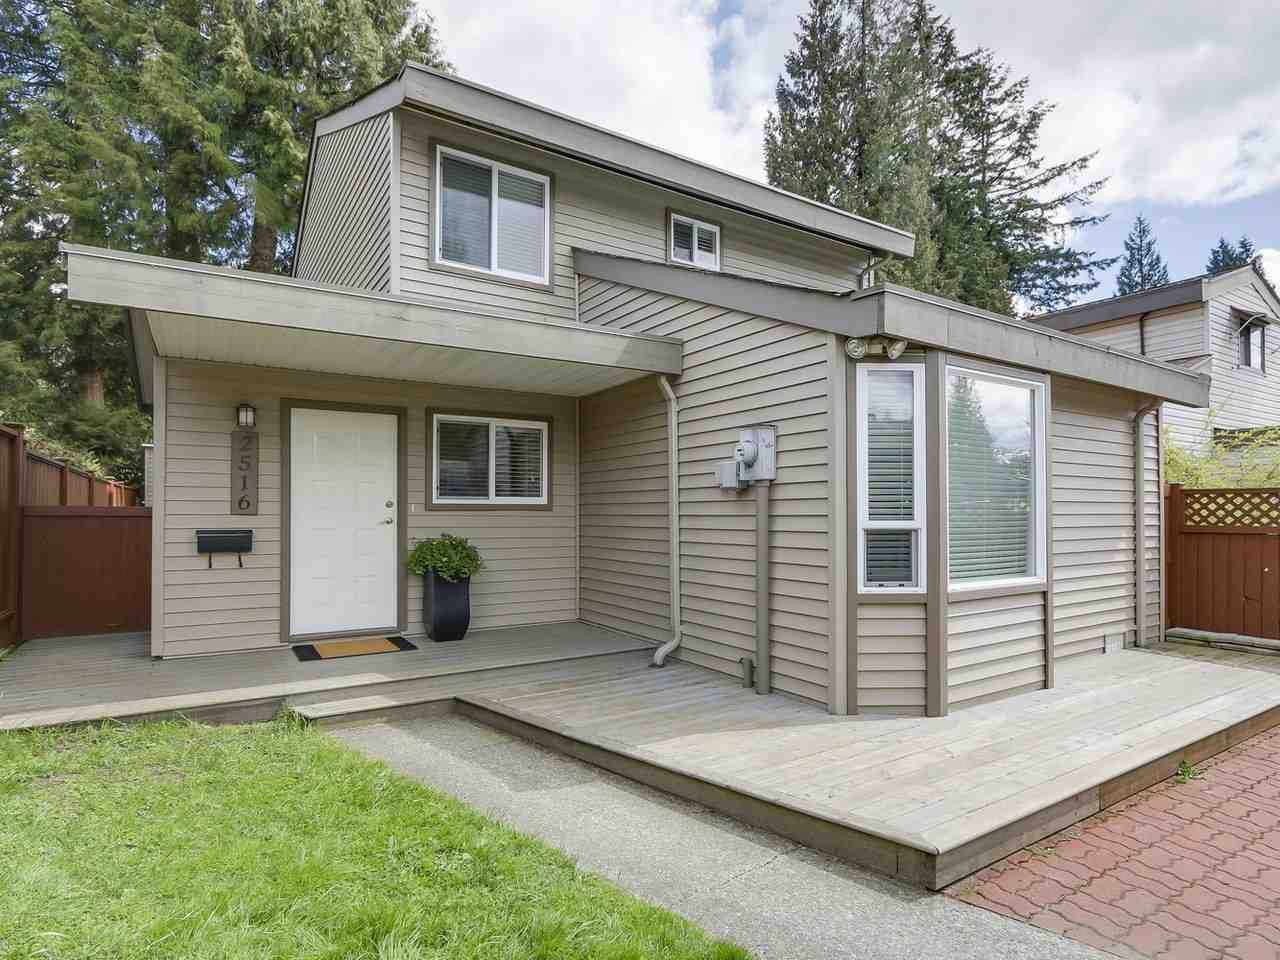 Main Photo: 2516 BURIAN Drive in Coquitlam: Coquitlam East House for sale : MLS®# R2161044